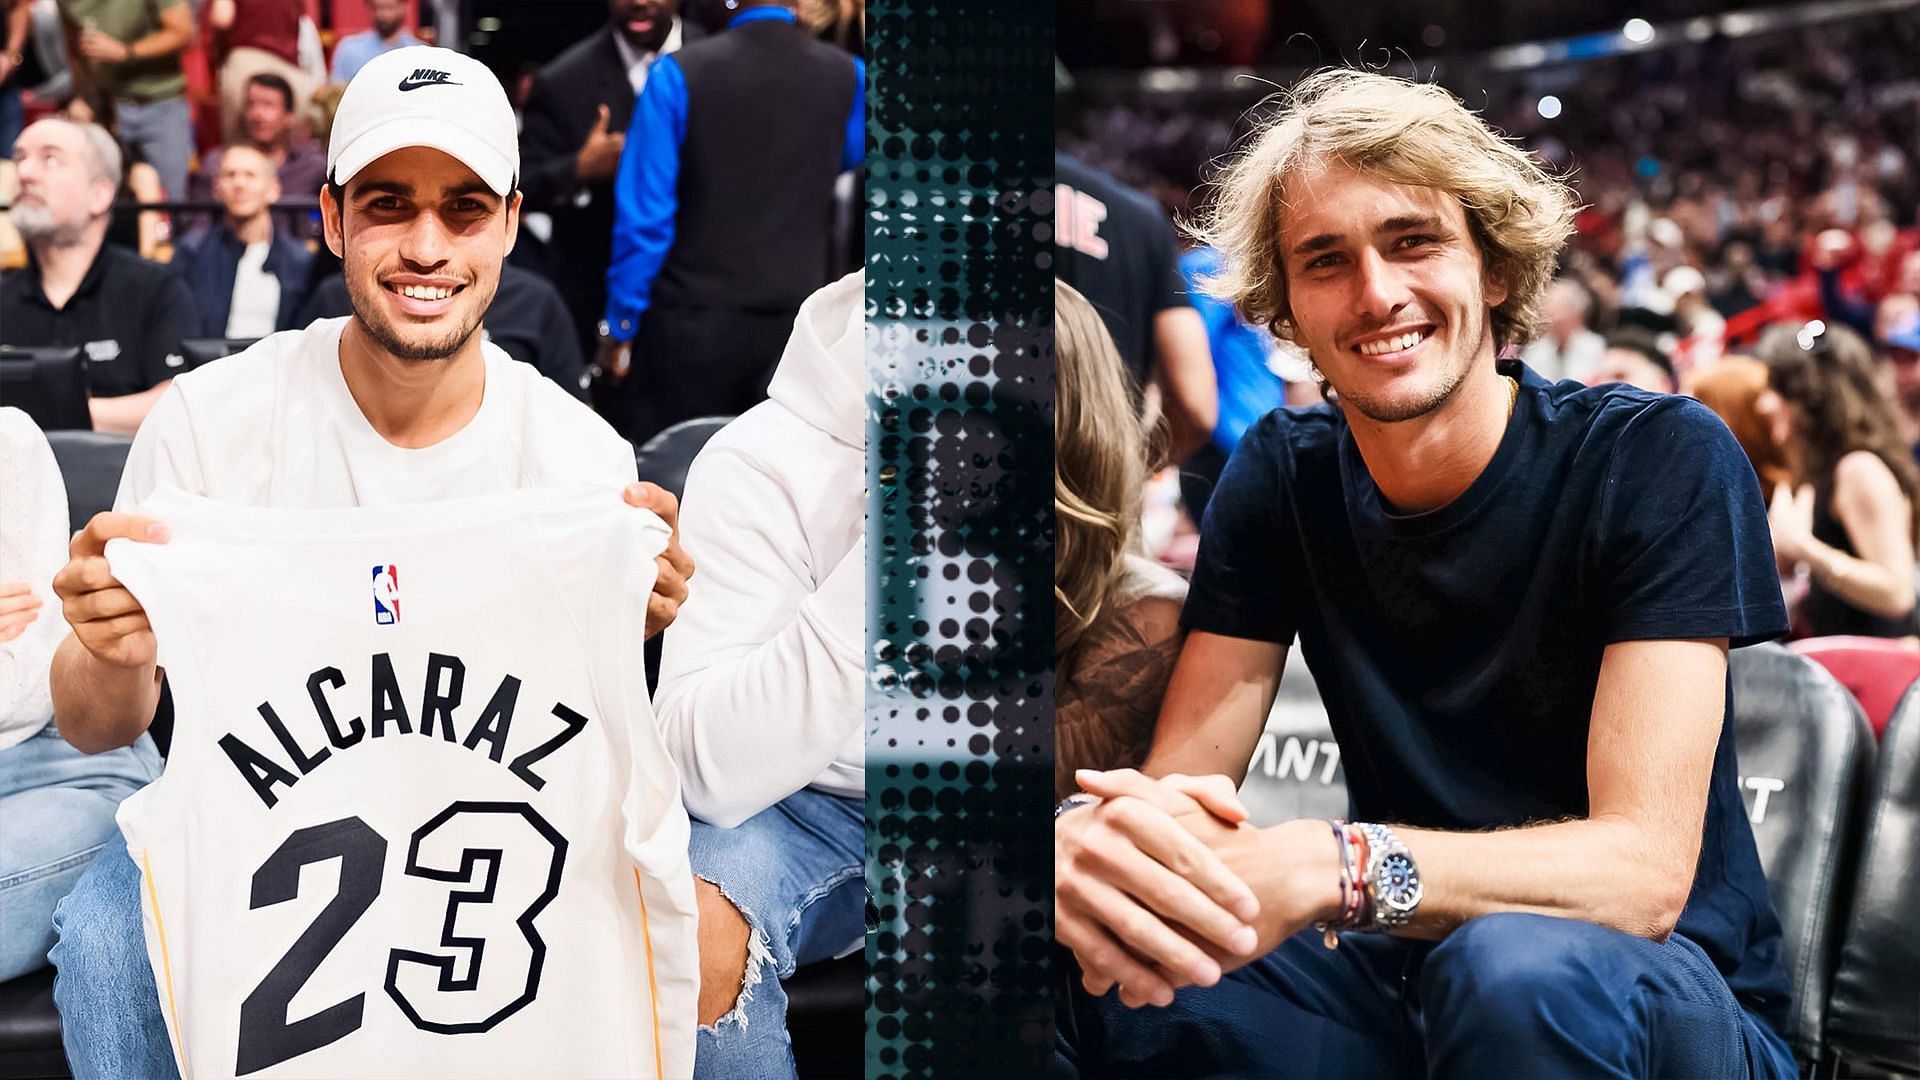 Carlos Alcaraz joins Alexander Zverev courtside to watch Miami Heat in action, hopes to catch NBA fan Frances Tiafoe next time